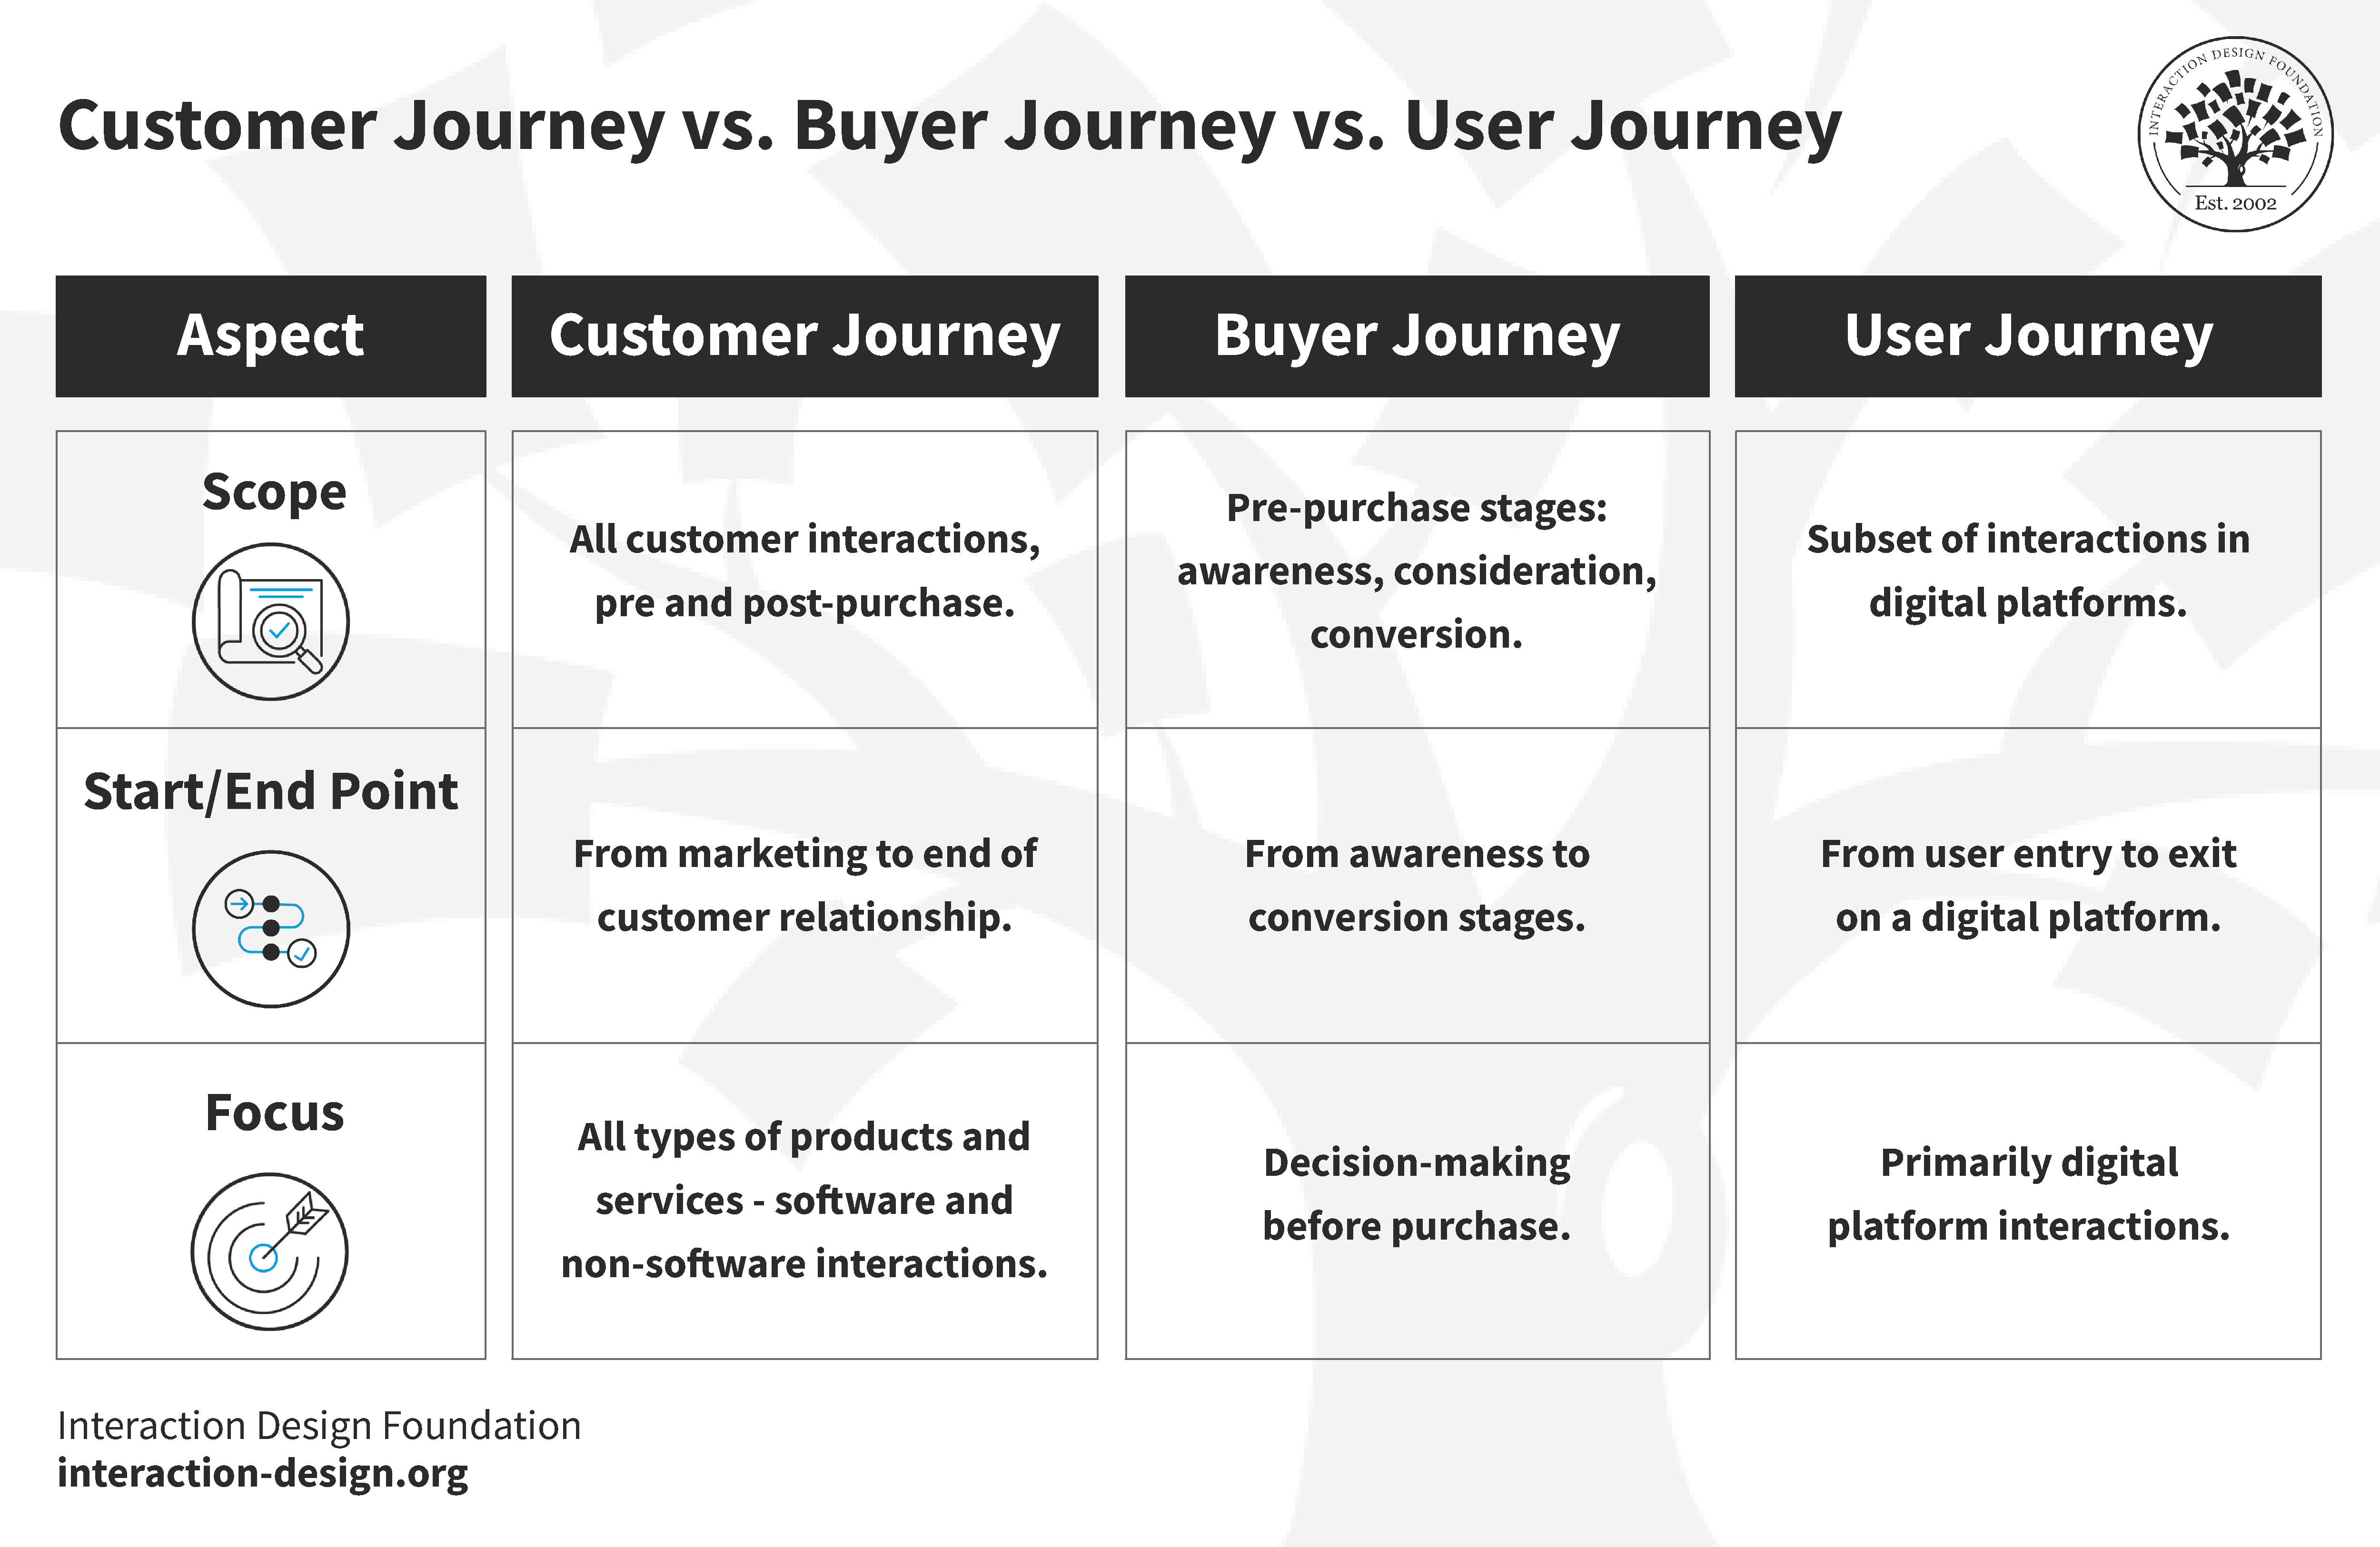 A gist of differences between customer, buyer, and user journeys. 